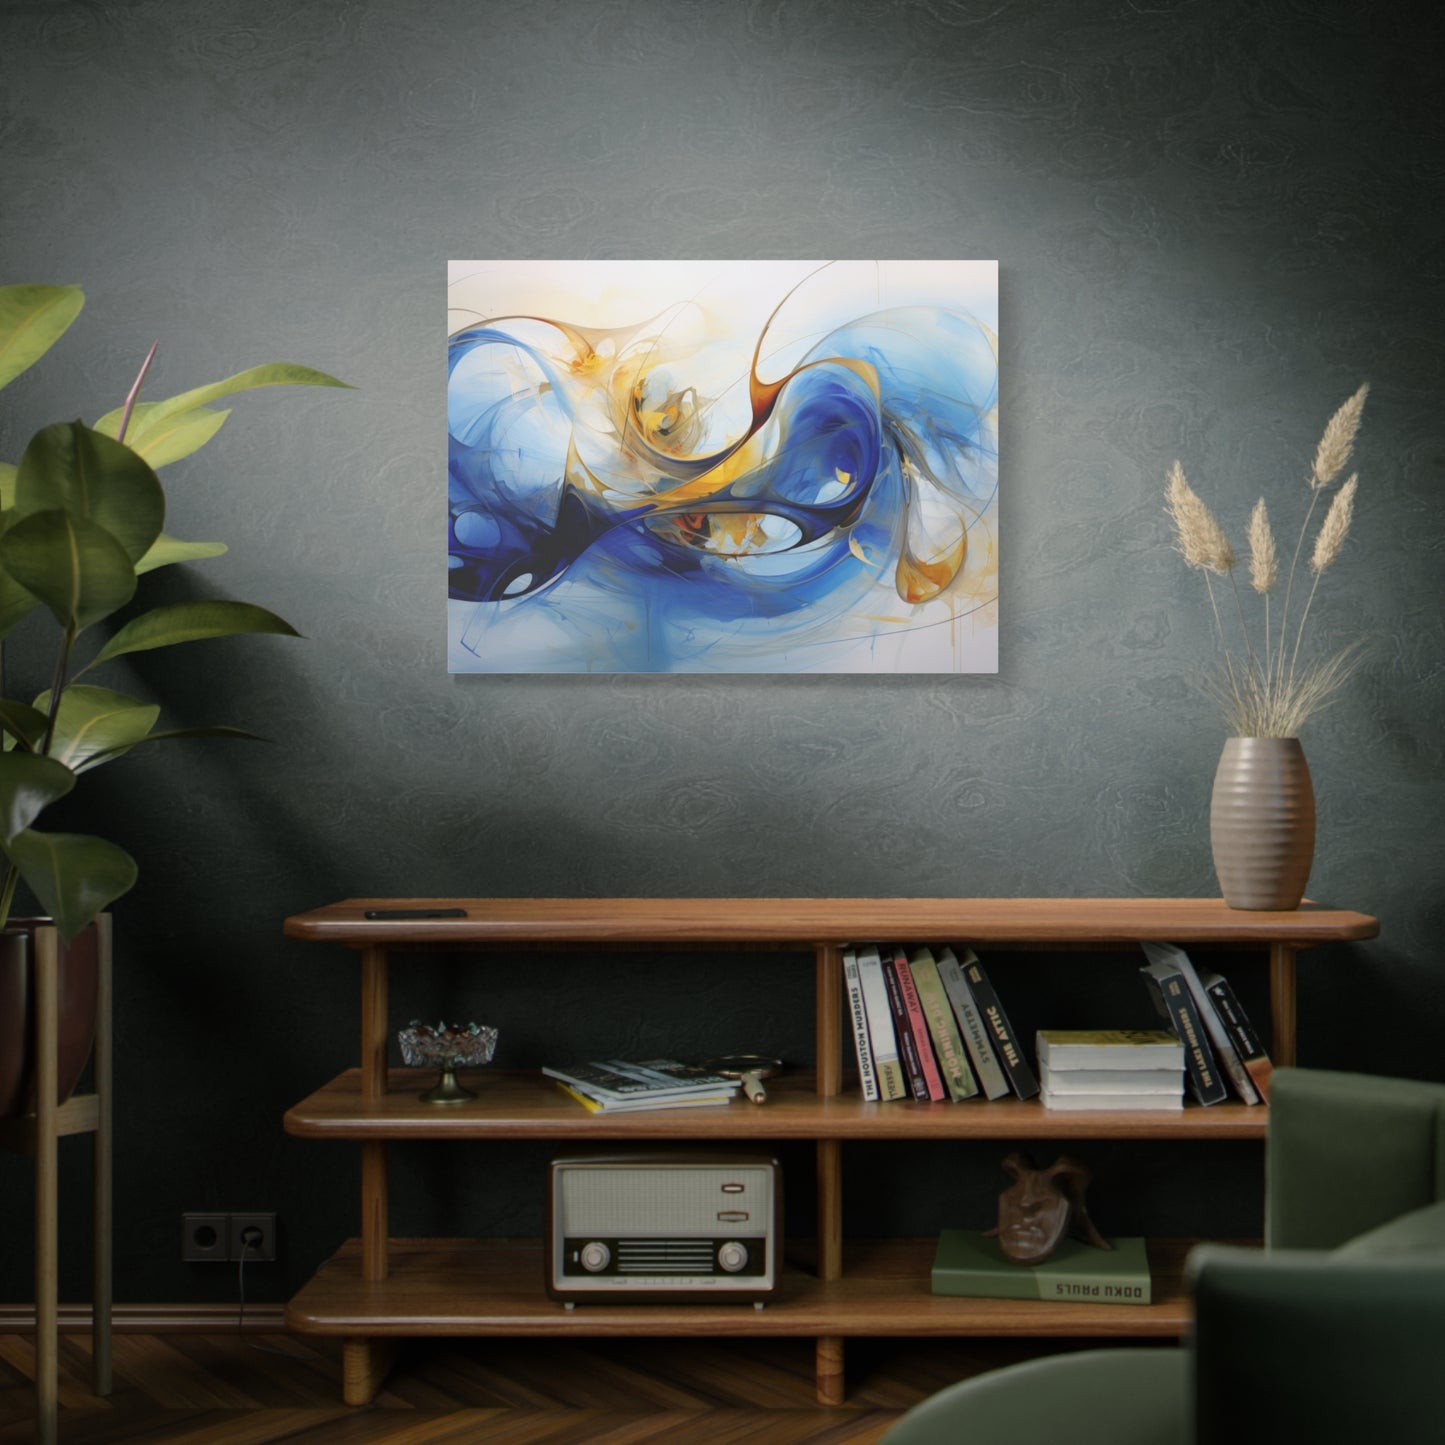 Abstract Blue wall art canvas Modern Canvas Print Blue Bright motion composition art Extra Large wall art Living room